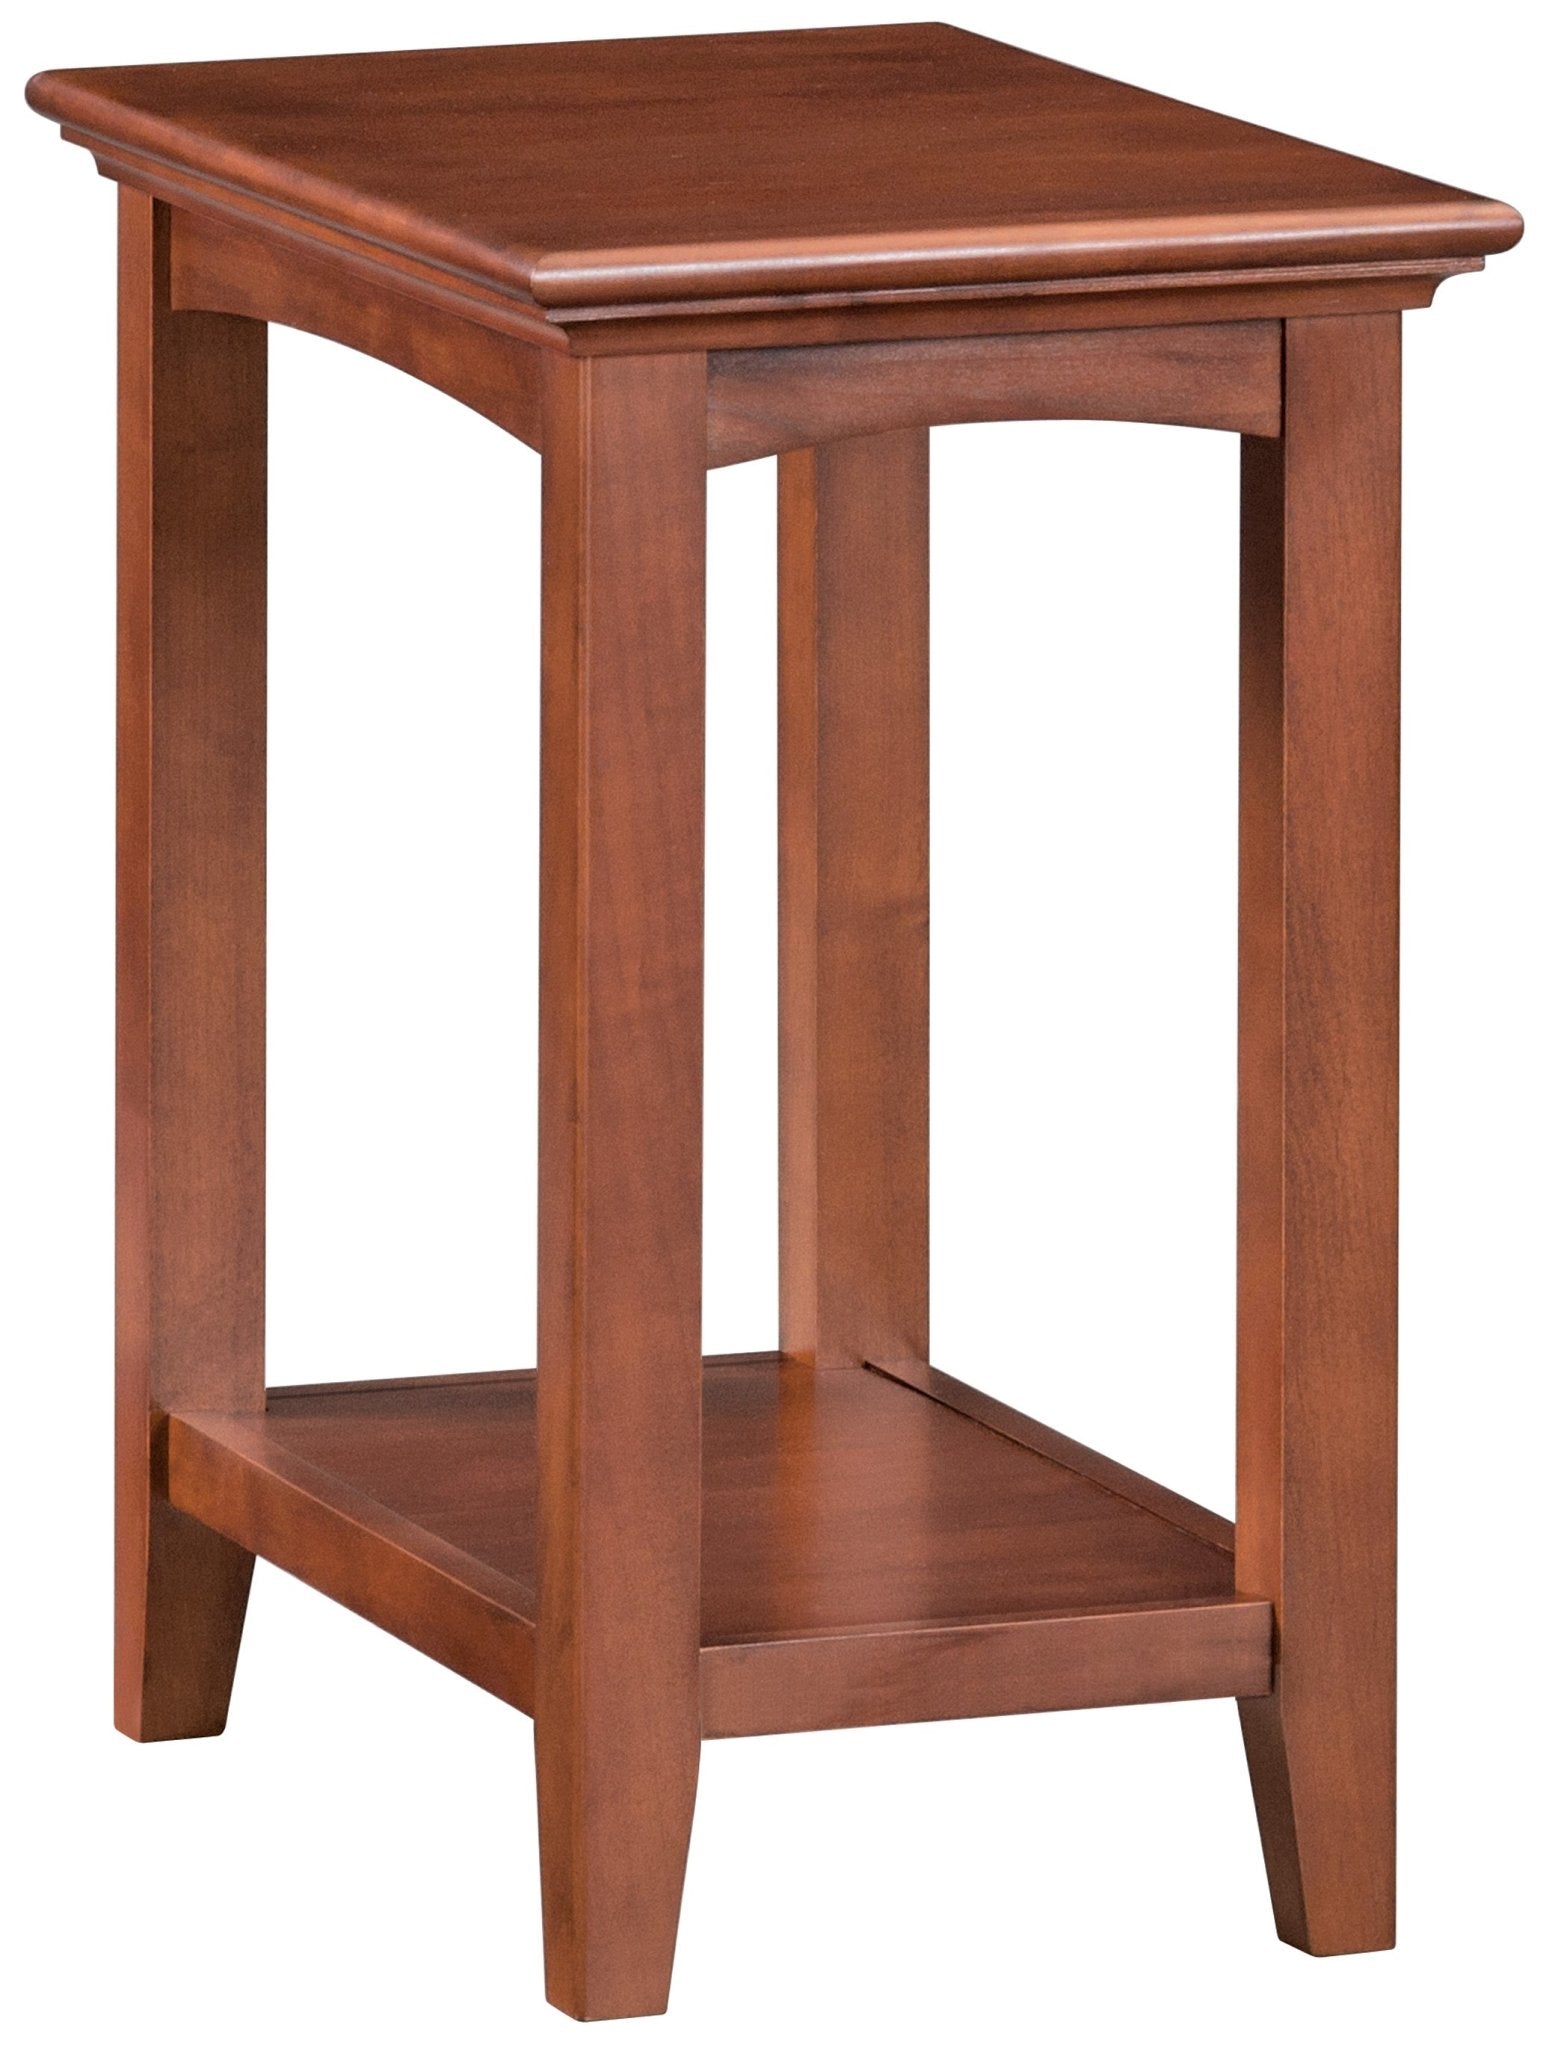 McKenzie Accent Table - Baconco